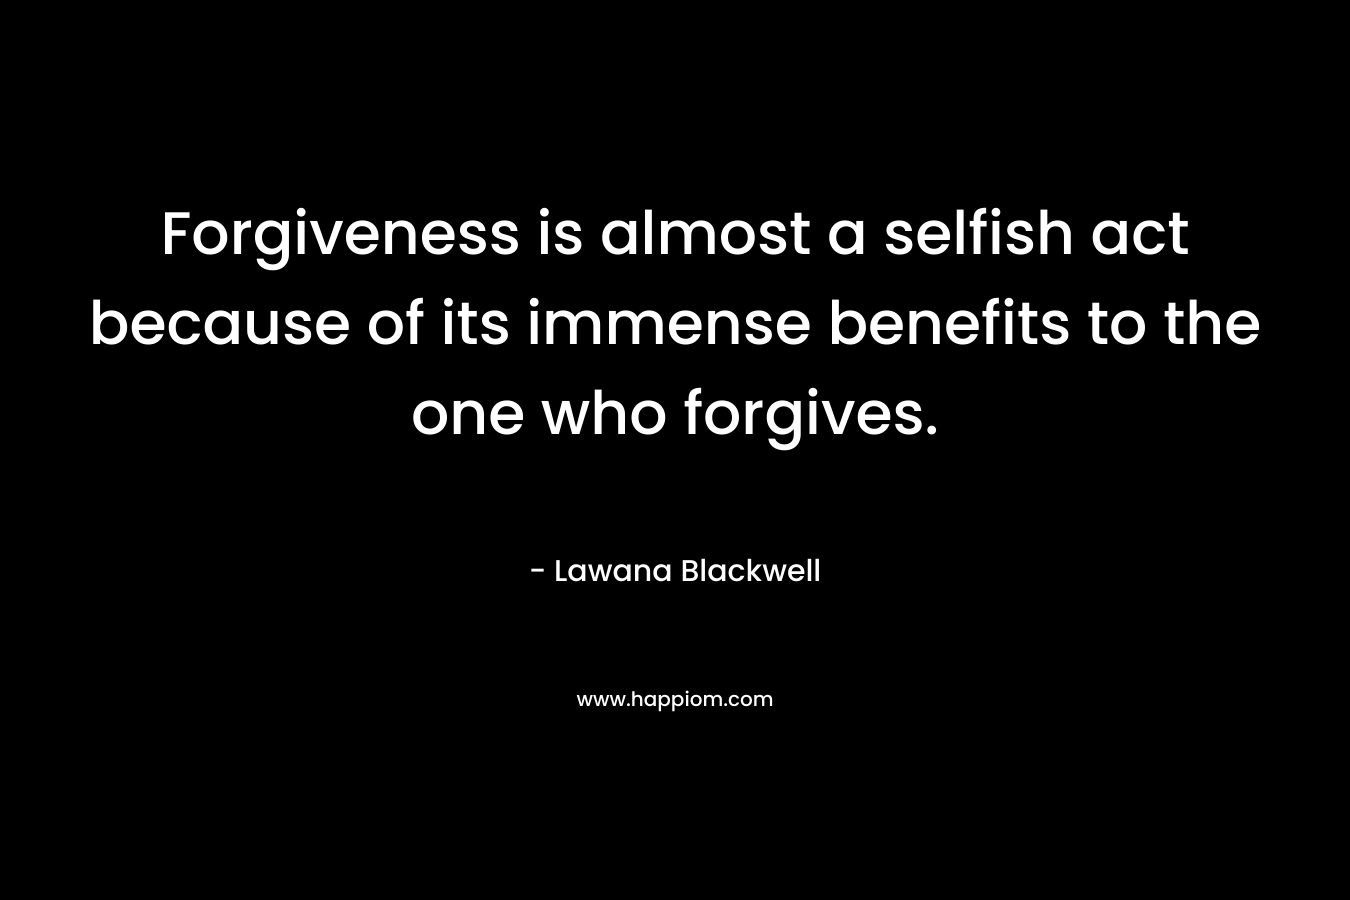 Forgiveness is almost a selfish act because of its immense benefits to the one who forgives.